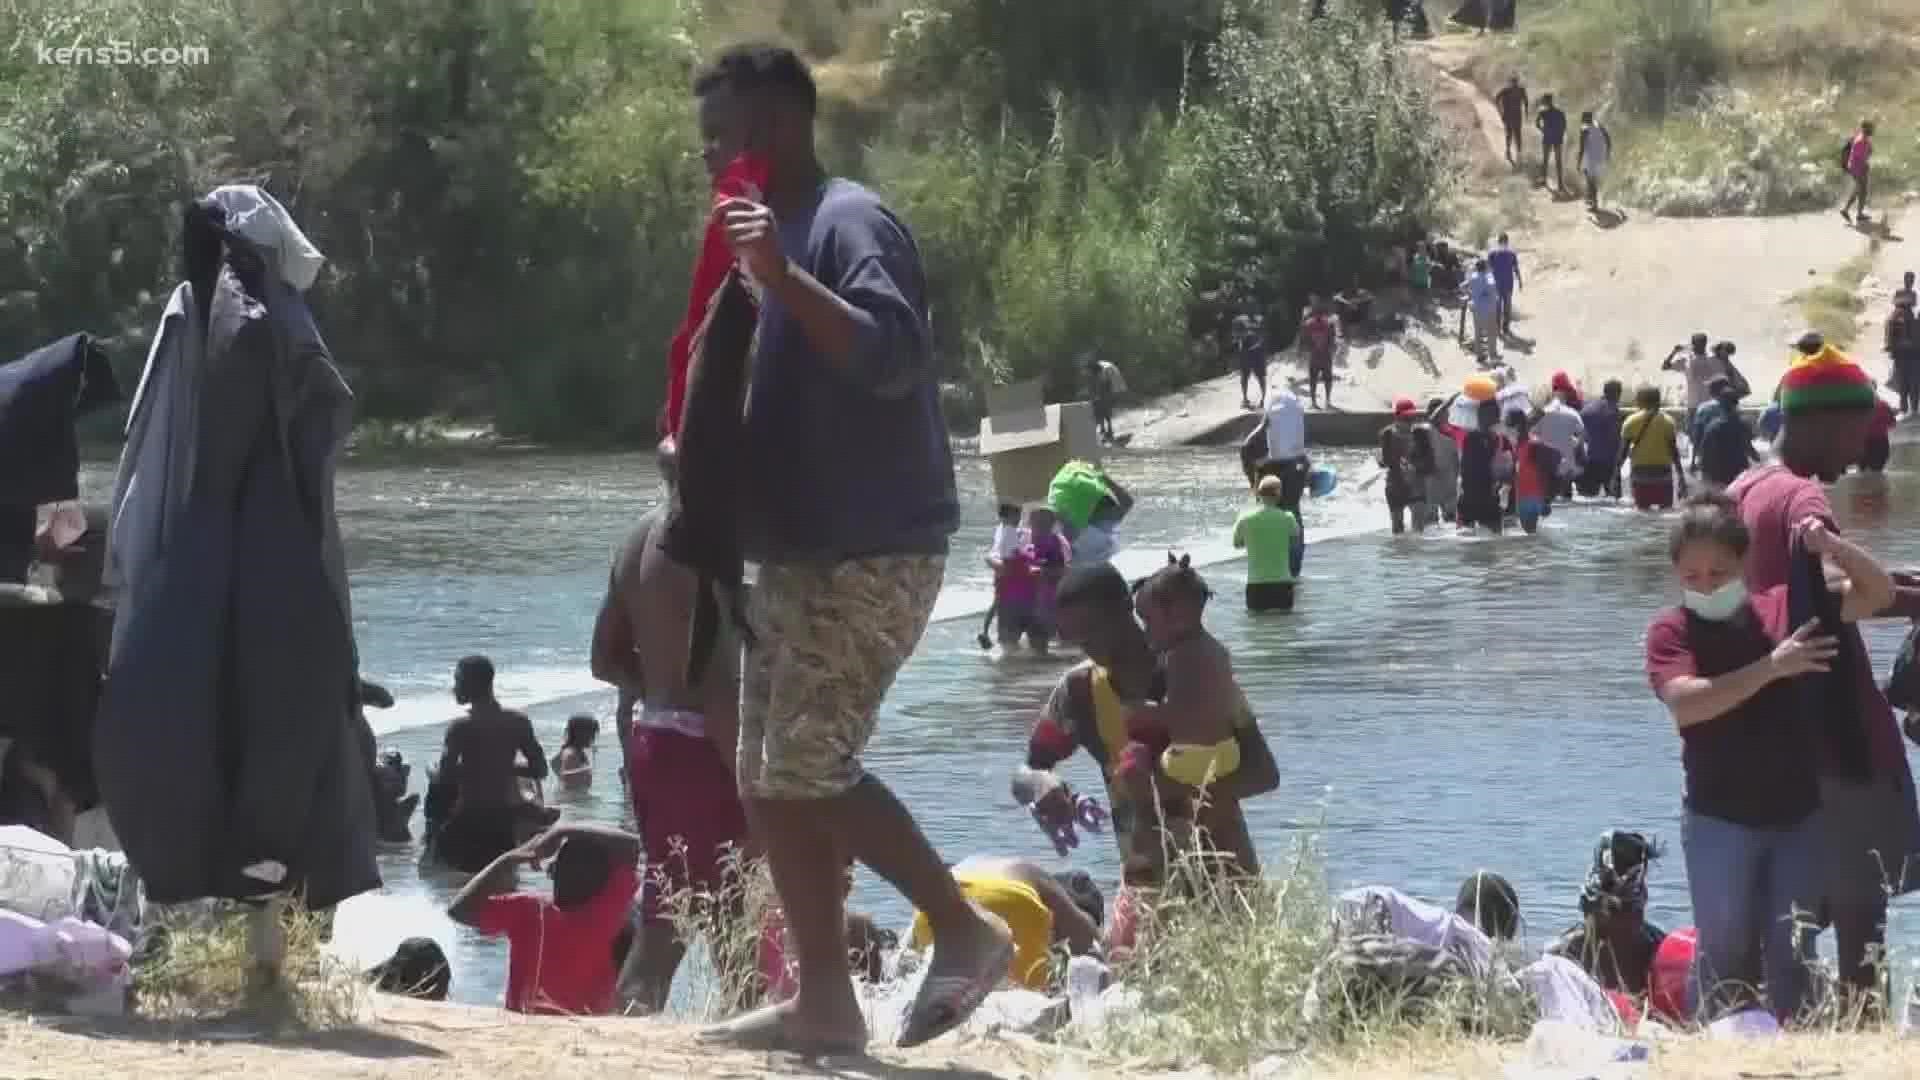 Officials say most of the migrants being held under the Del Rio International Bridge are from Haiti.